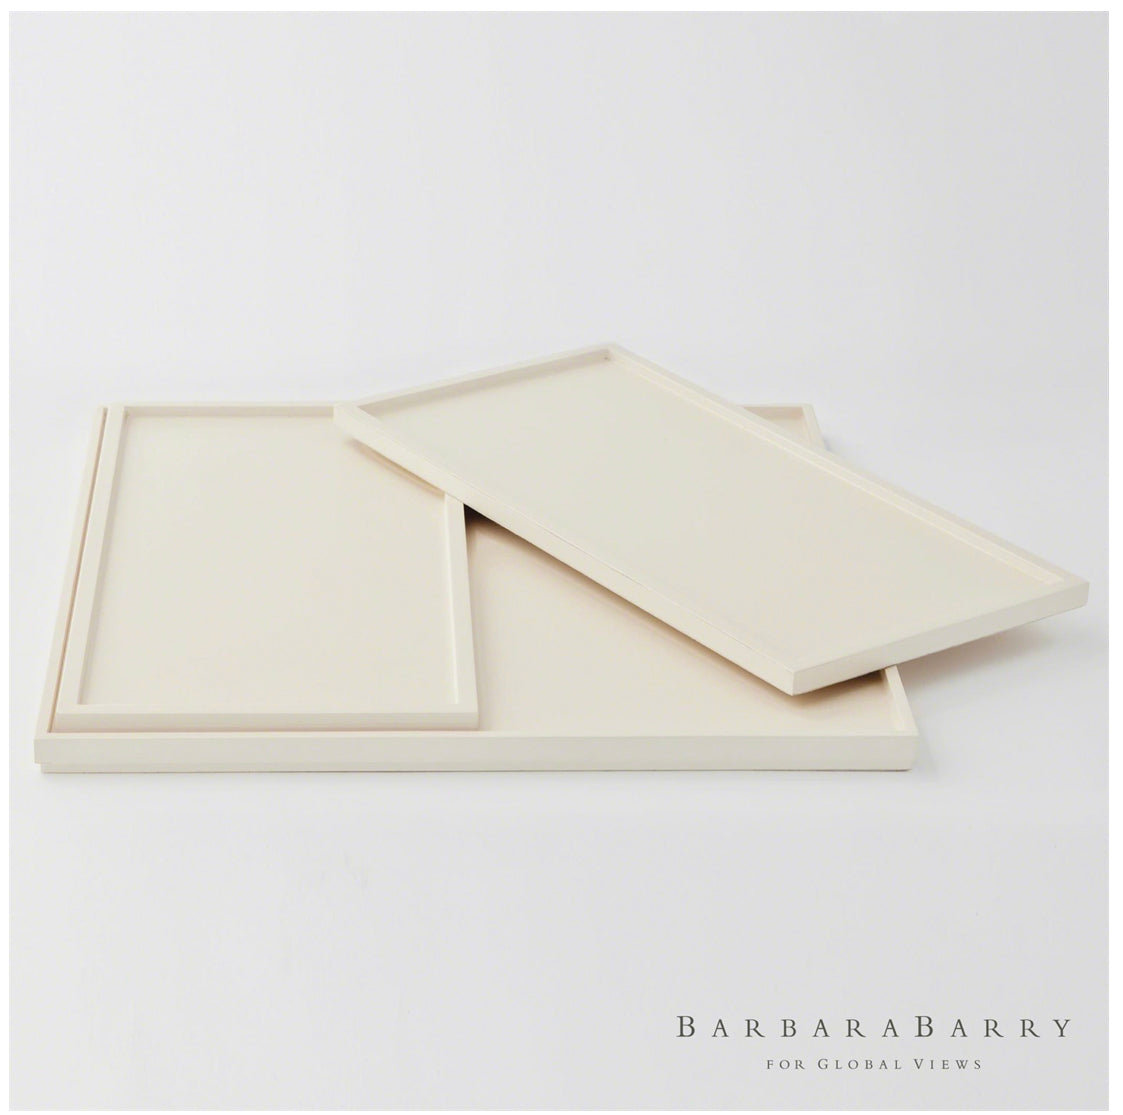 S/3 Nesting Trays in Ivory Lacquer